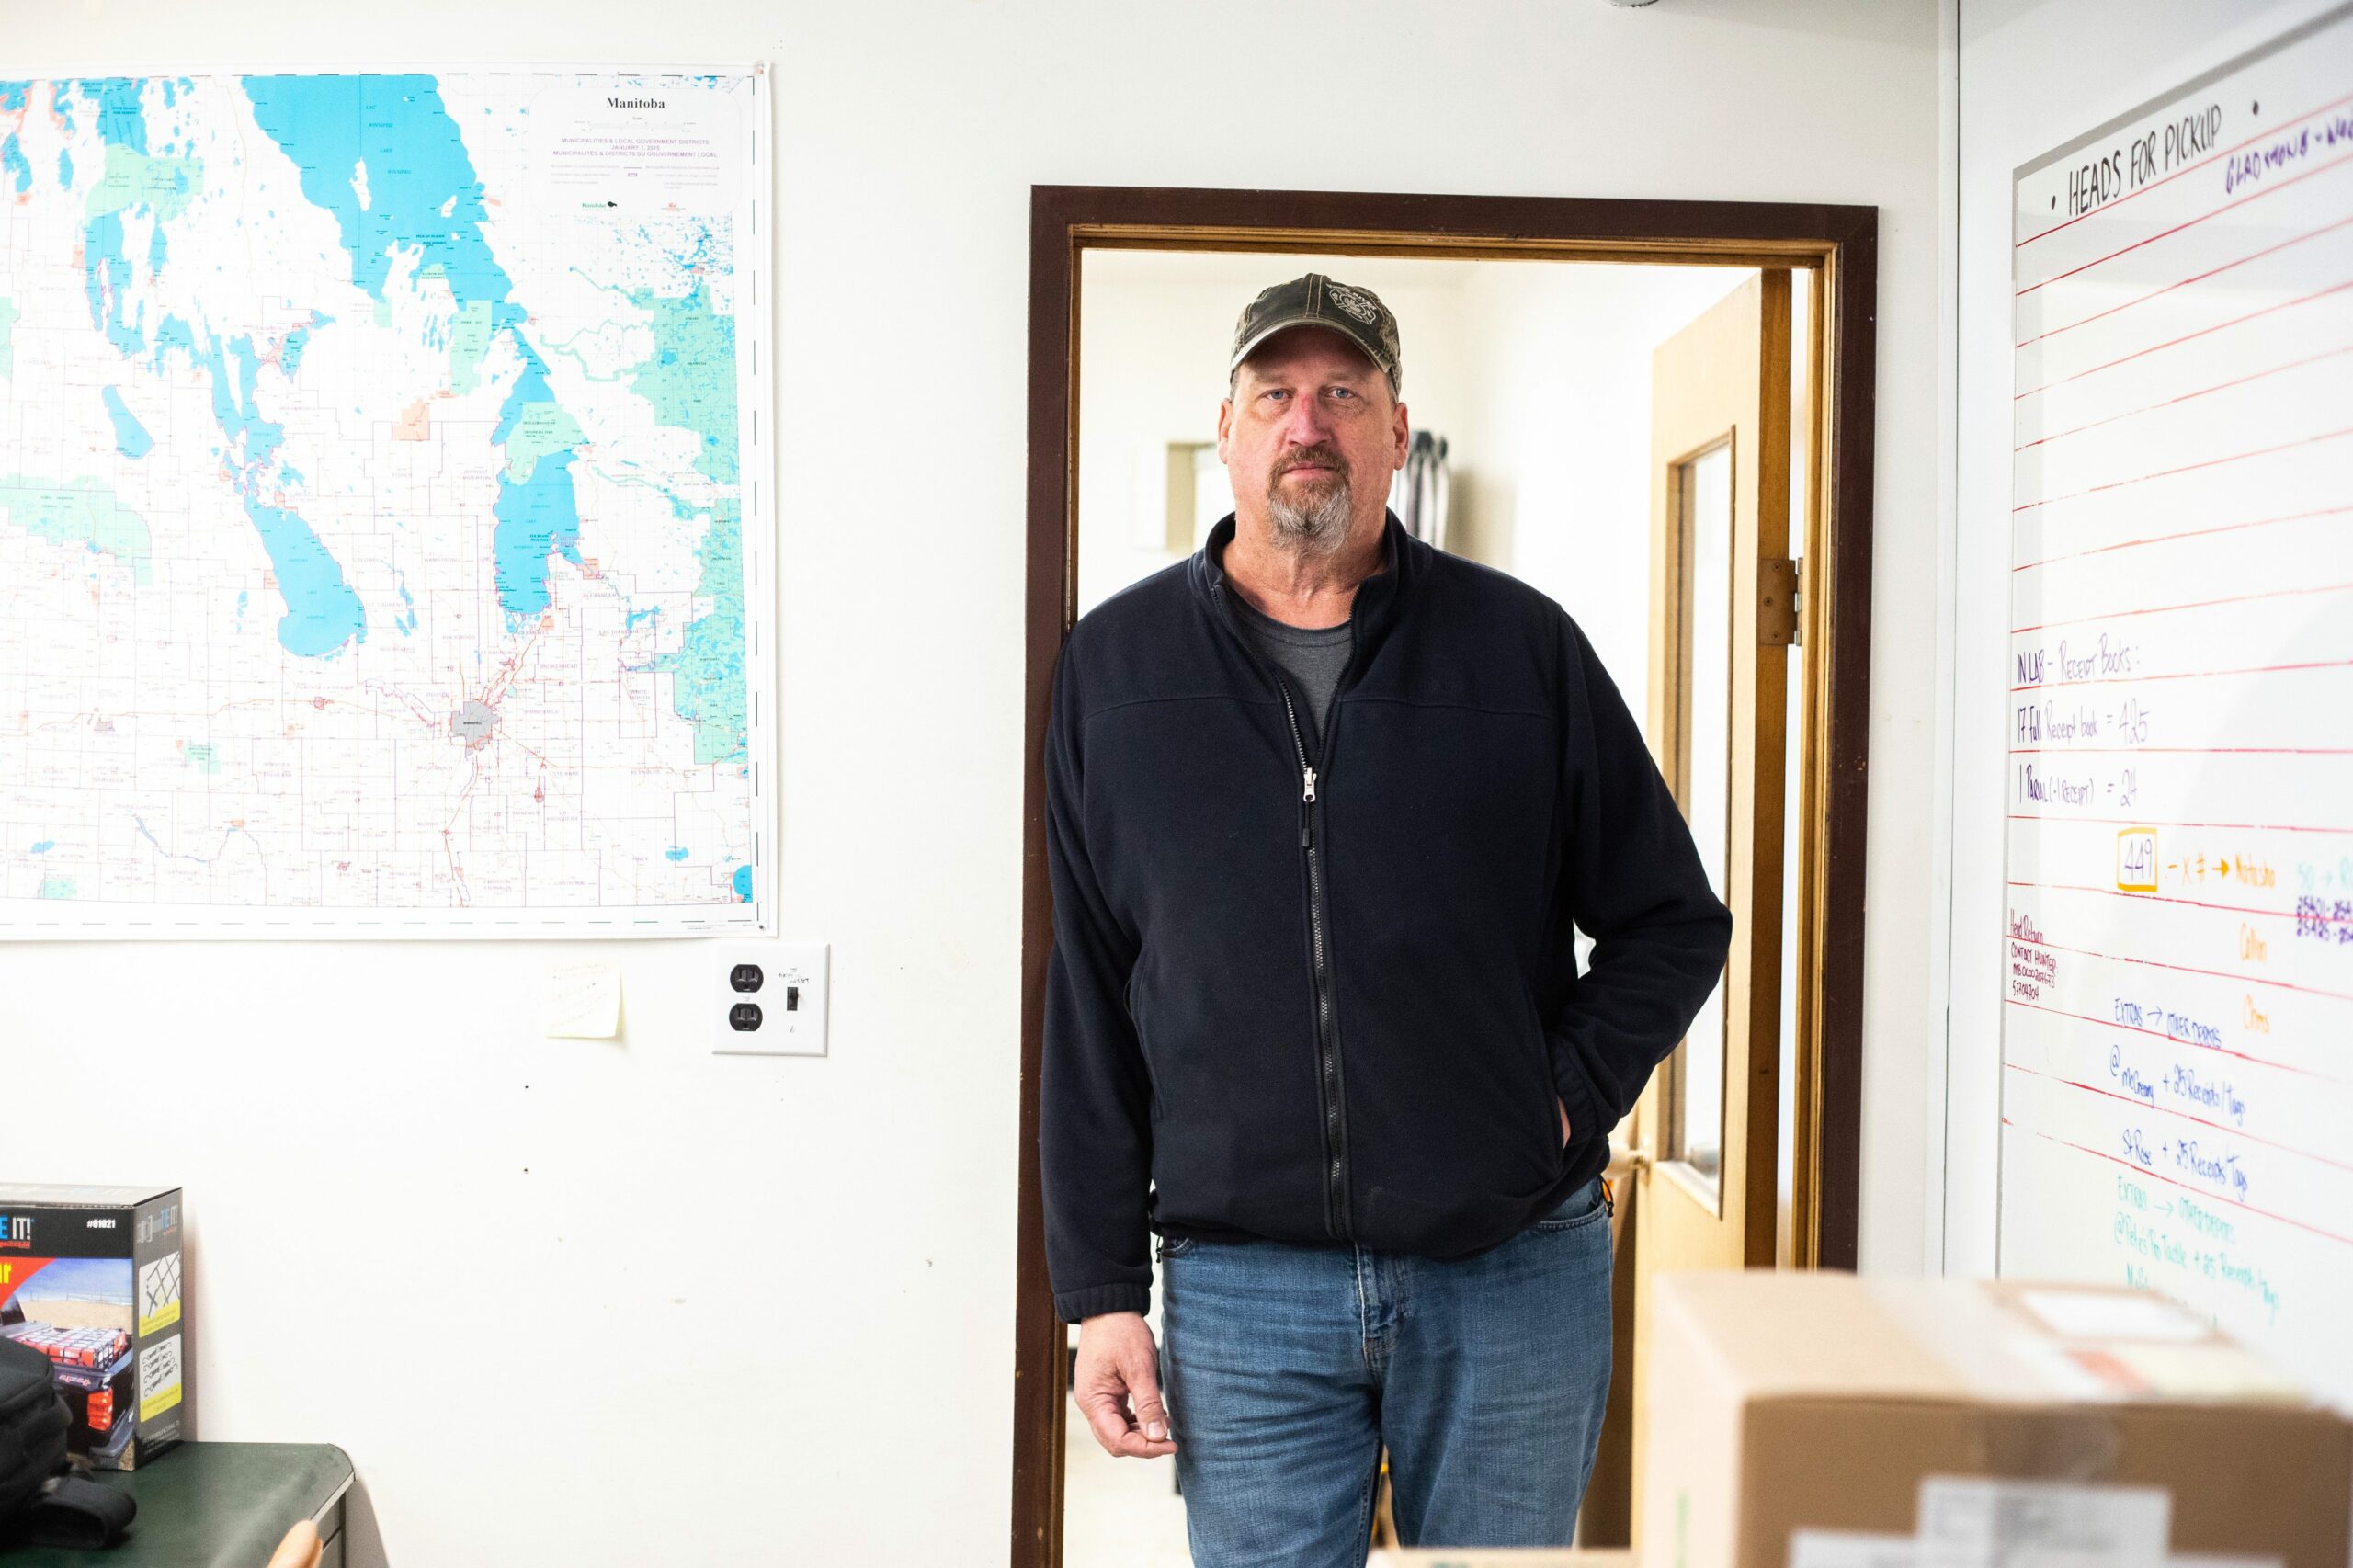 Manitoba wildlife health biologist Richard Davis stands in the doorway of his office in the province's wildlife health laboratory